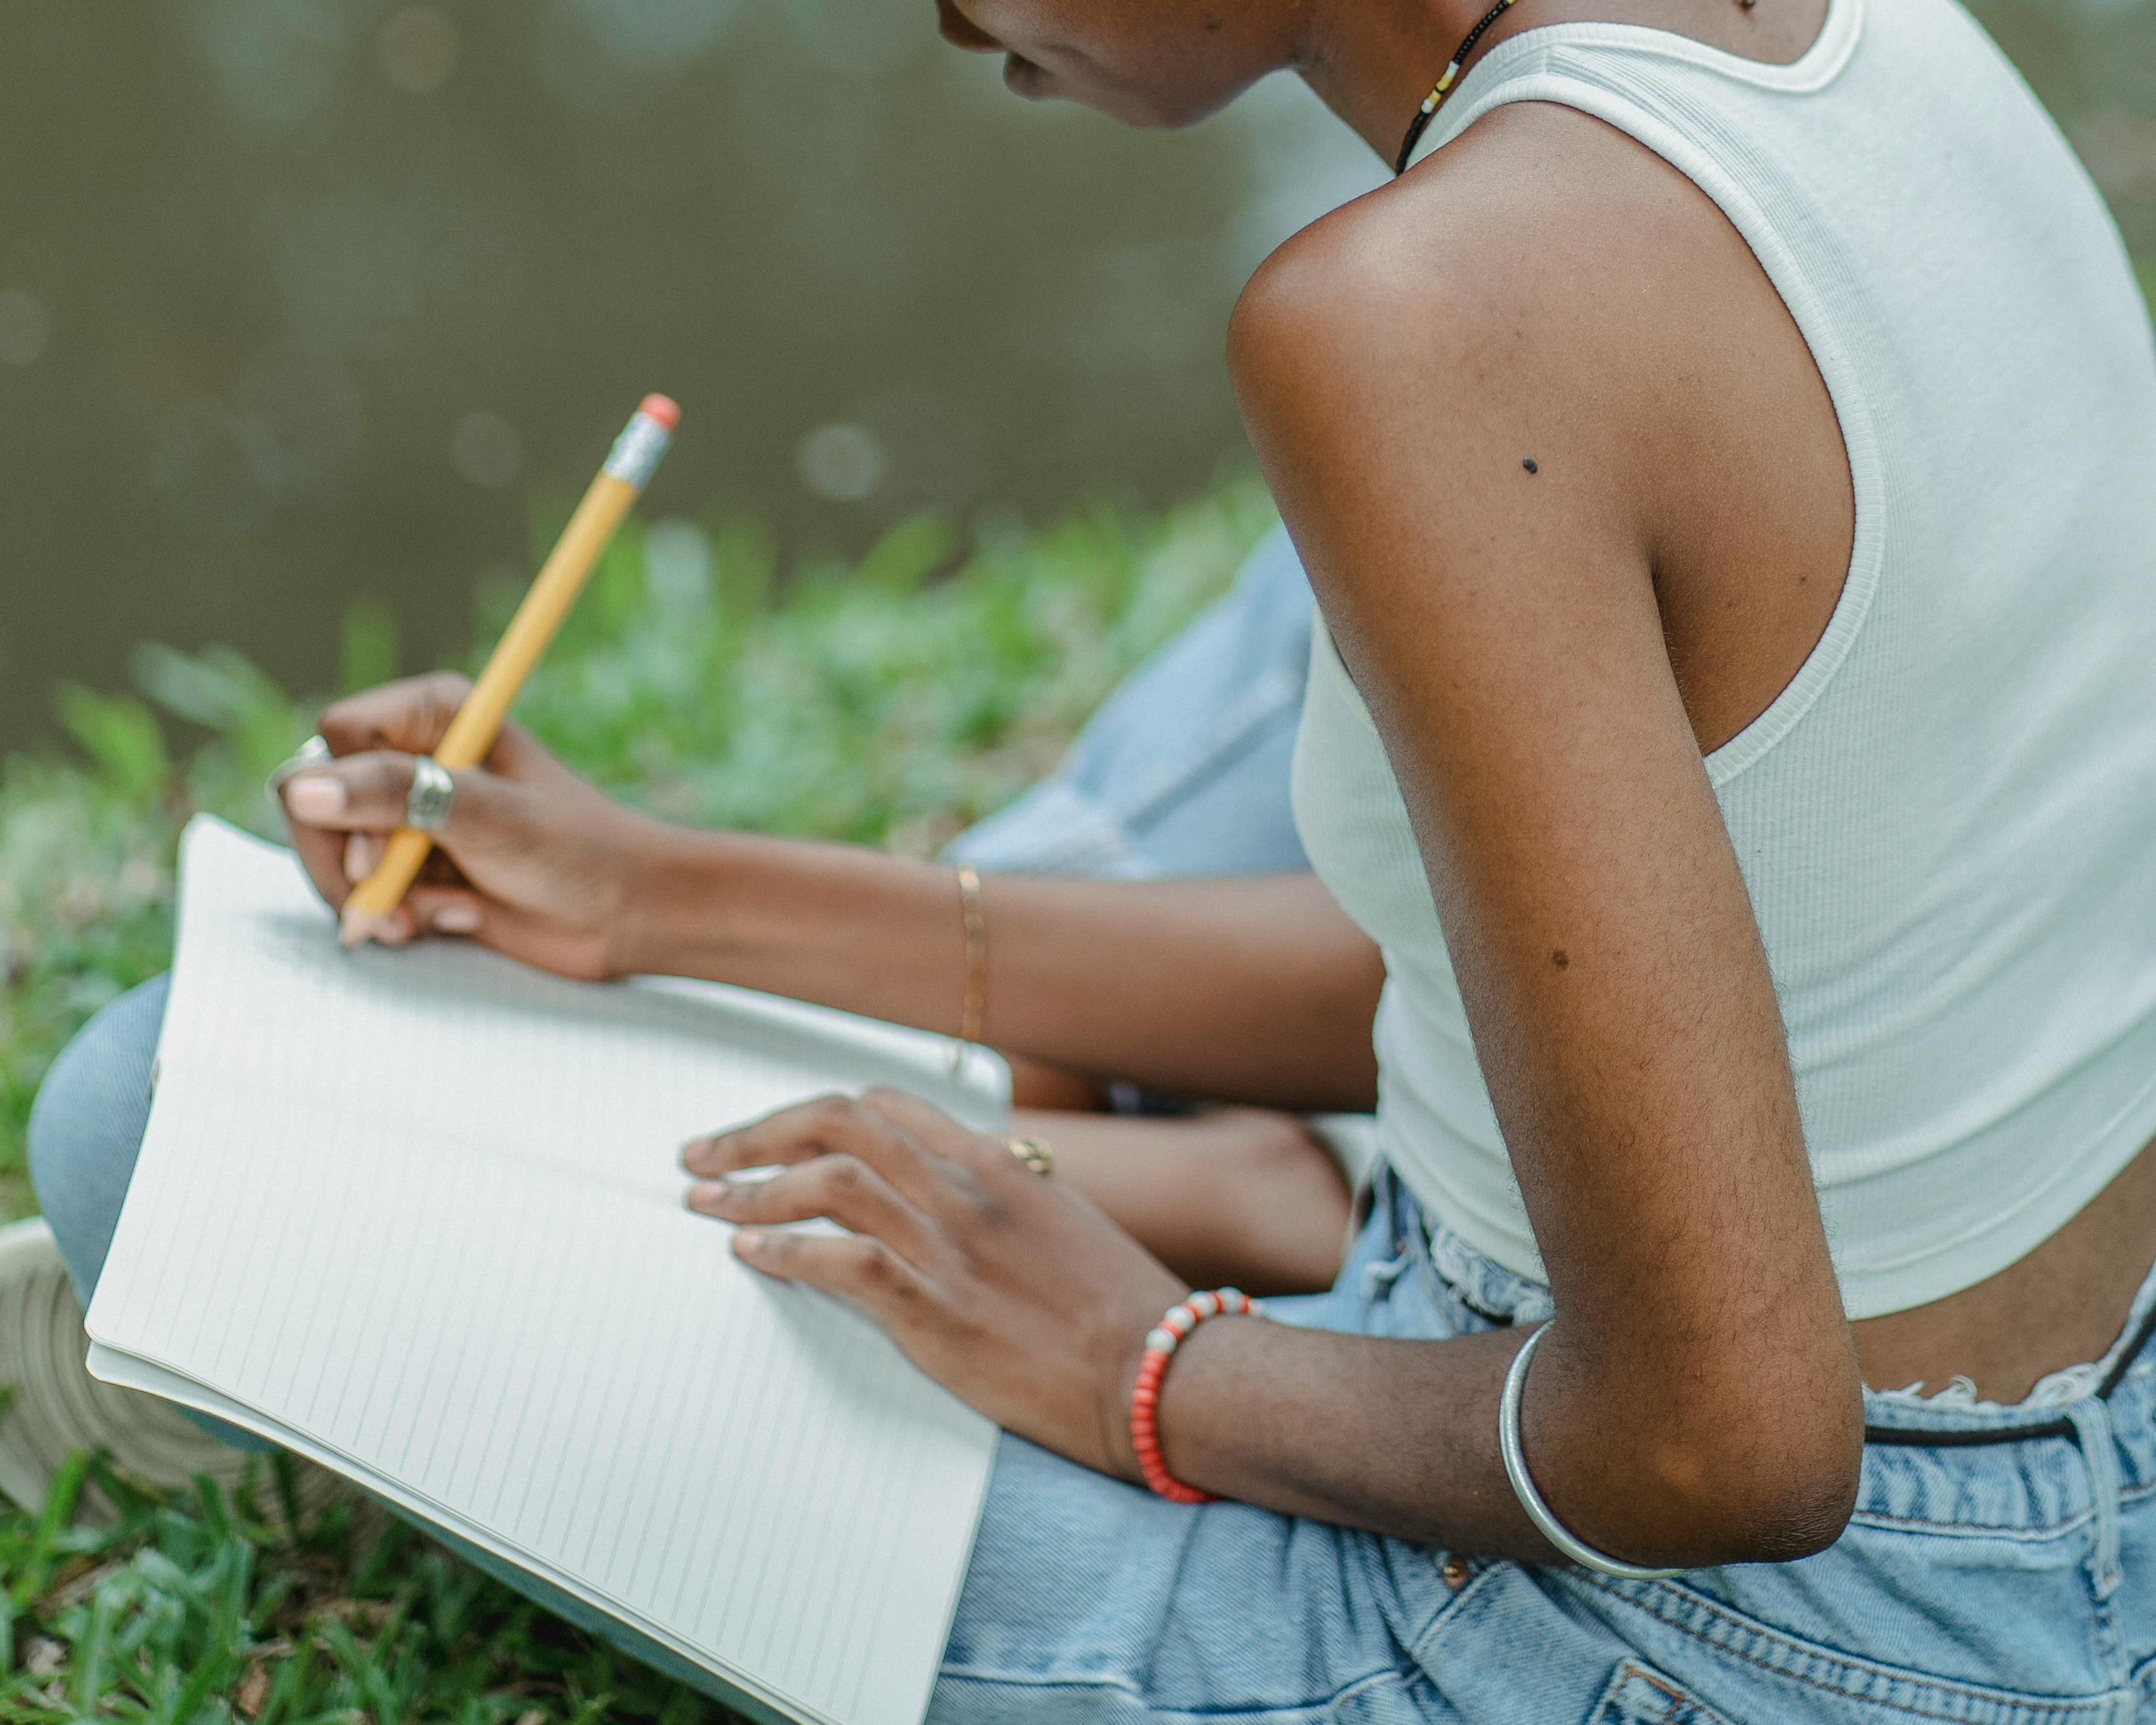 An image of a black person sat by a river bank with a notepad and pencil in hand as they write.